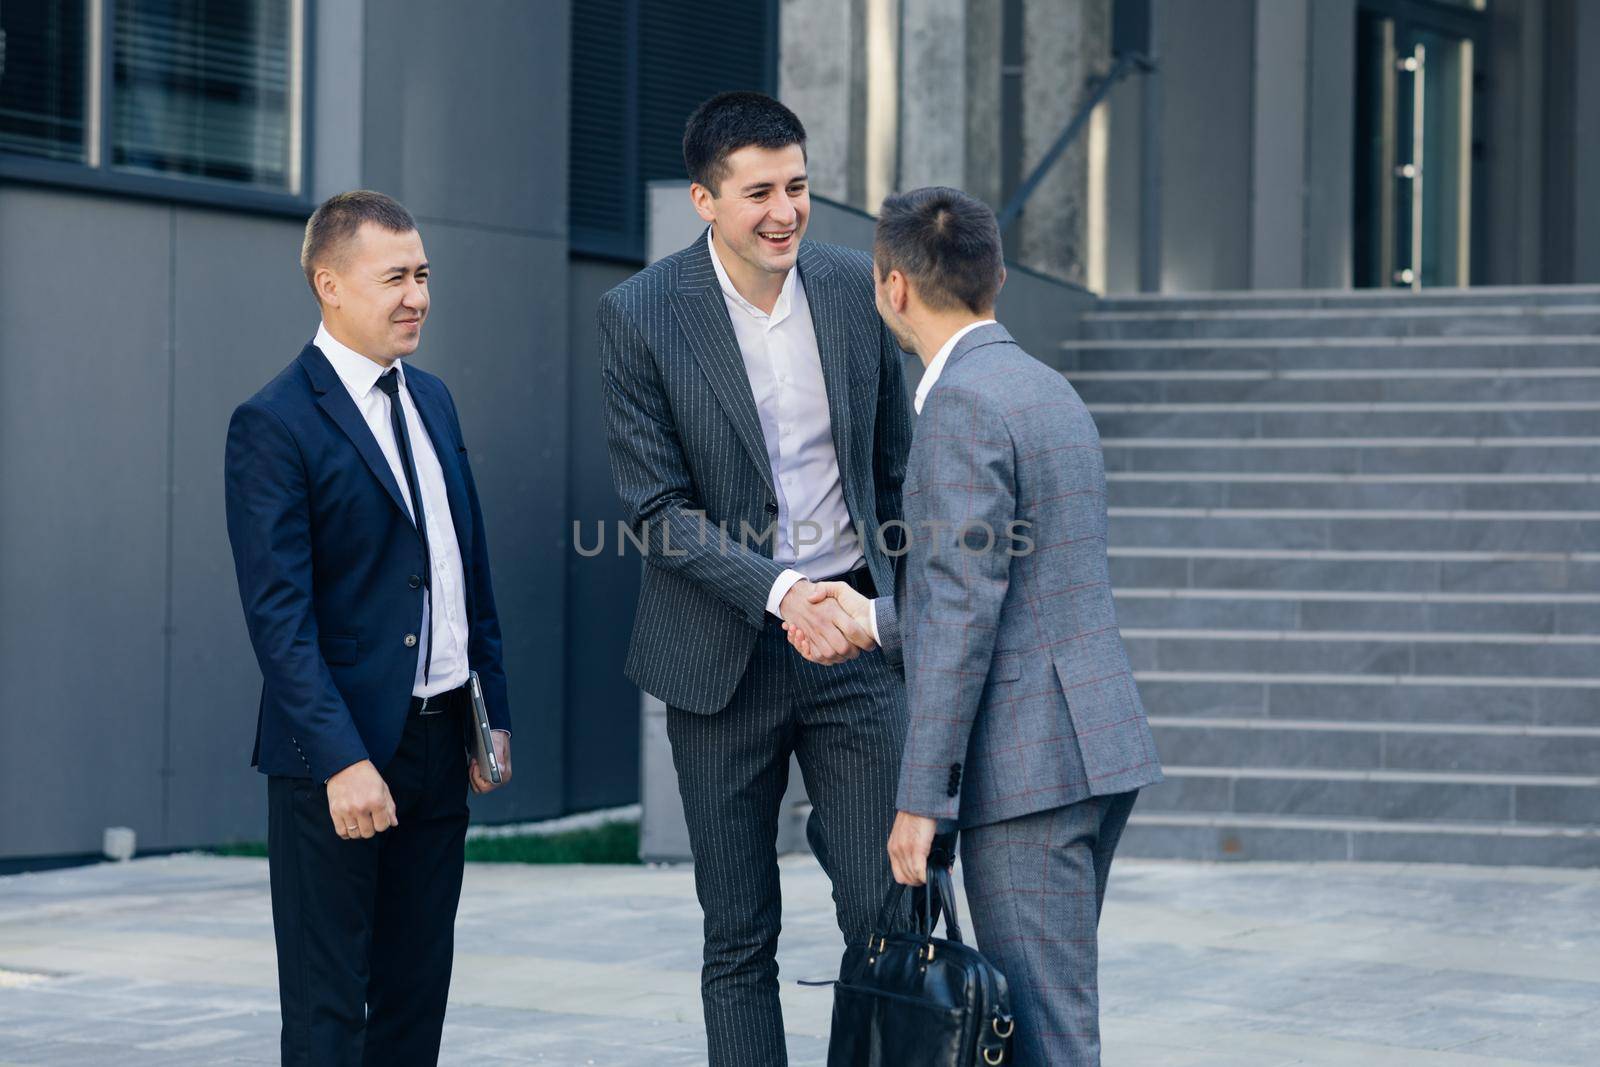 Group of Happy Men Corporate Workers Greeting Each Other Shaking Hands Starting Their Working Day in Contemporary Business District